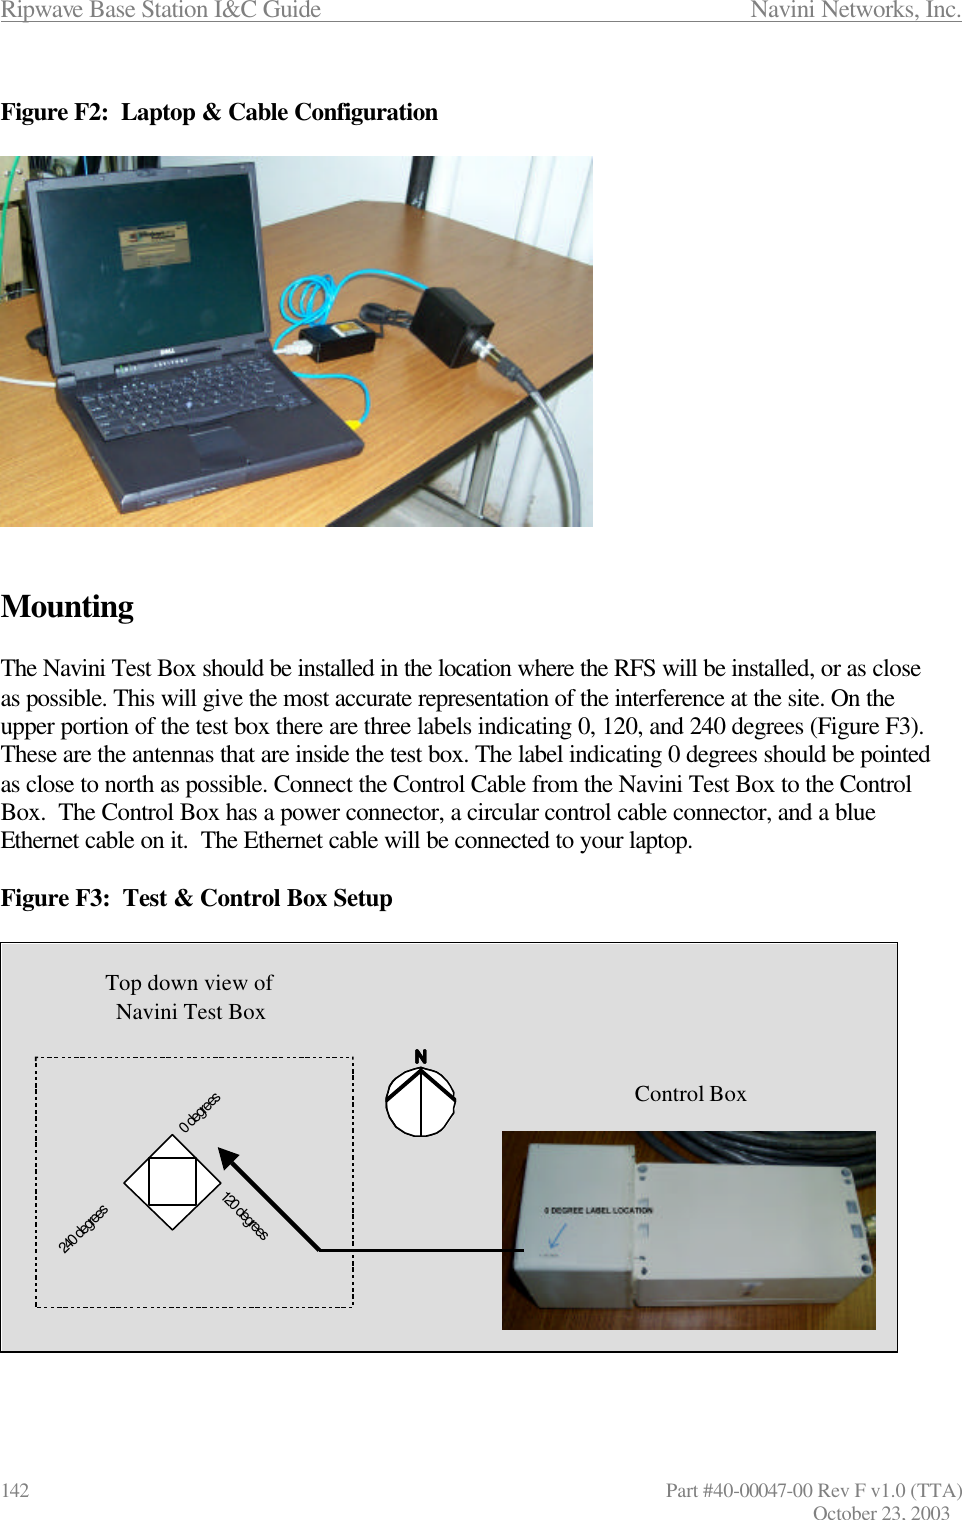 Ripwave Base Station I&amp;C Guide                 Navini Networks, Inc. 142                      Part #40-00047-00 Rev F v1.0 (TTA) October 23, 2003  Figure F2:  Laptop &amp; Cable Configuration                 Mounting  The Navini Test Box should be installed in the location where the RFS will be installed, or as close as possible. This will give the most accurate representation of the interference at the site. On the upper portion of the test box there are three labels indicating 0, 120, and 240 degrees (Figure F3). These are the antennas that are inside the test box. The label indicating 0 degrees should be pointed as close to north as possible. Connect the Control Cable from the Navini Test Box to the Control Box.  The Control Box has a power connector, a circular control cable connector, and a blue Ethernet cable on it.  The Ethernet cable will be connected to your laptop.   Figure F3:  Test &amp; Control Box Setup    0 degrees120 degrees240 degreesTop down view of Navini Test BoxControl Box0 degrees120 degrees240 degreesTop down view of Navini Test BoxControl Box